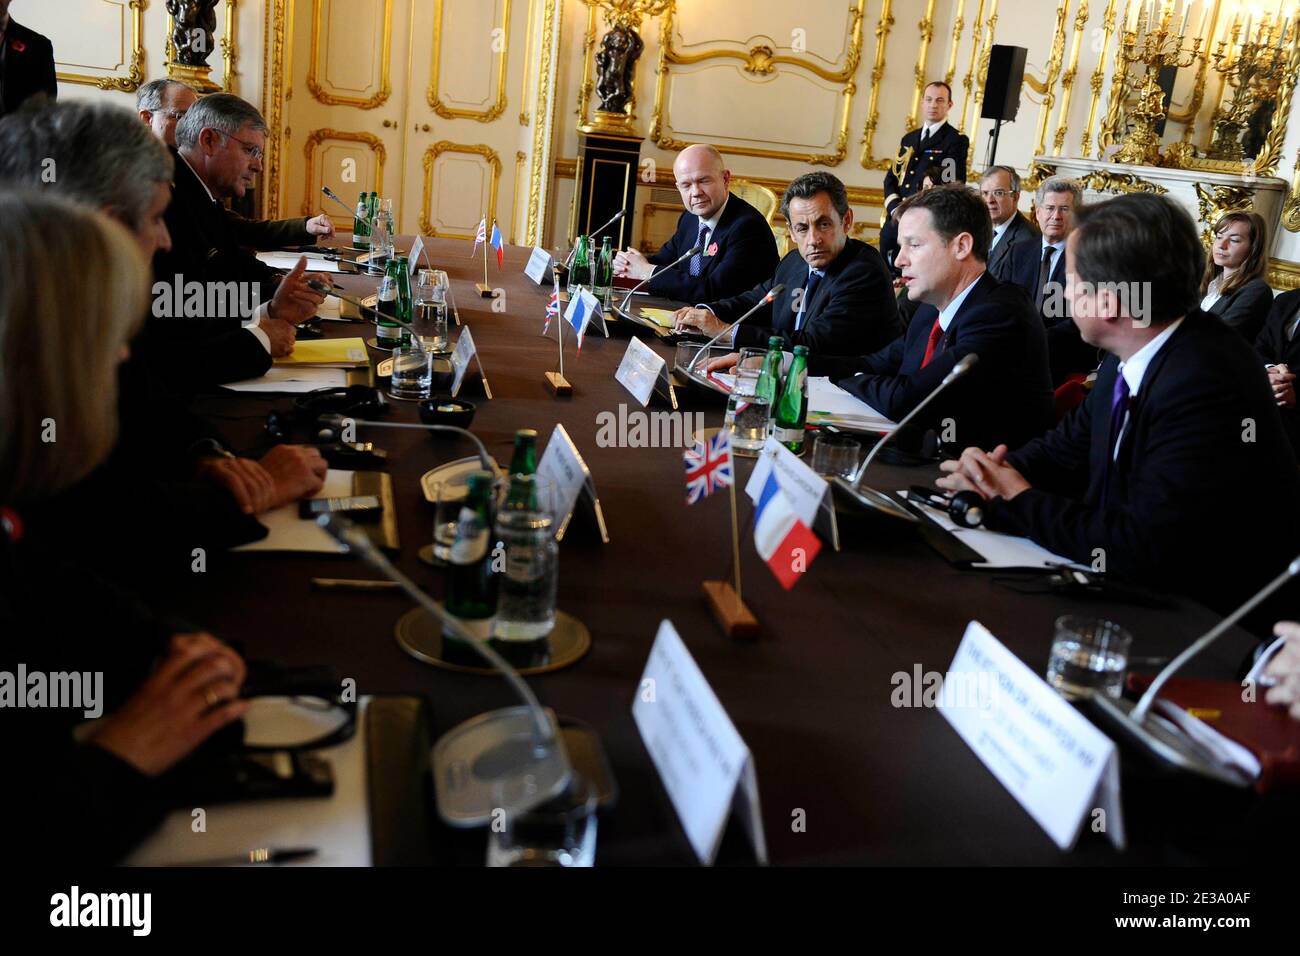 Exclusive. French President Nicolas Sarkozy, British Deputy Prime Minister Nick Clegg and British Prime Minister David Cameron are pictured during an Franco-British Summit, at Lancaster House in London, UK on November 2, 2010. Cameron and Sarkozy are likely to sign far-reaching treaties which will commit their forces to operating together for decades to come. Photo by Elodie Gregoire/ABACAPRESS.COM Stock Photo